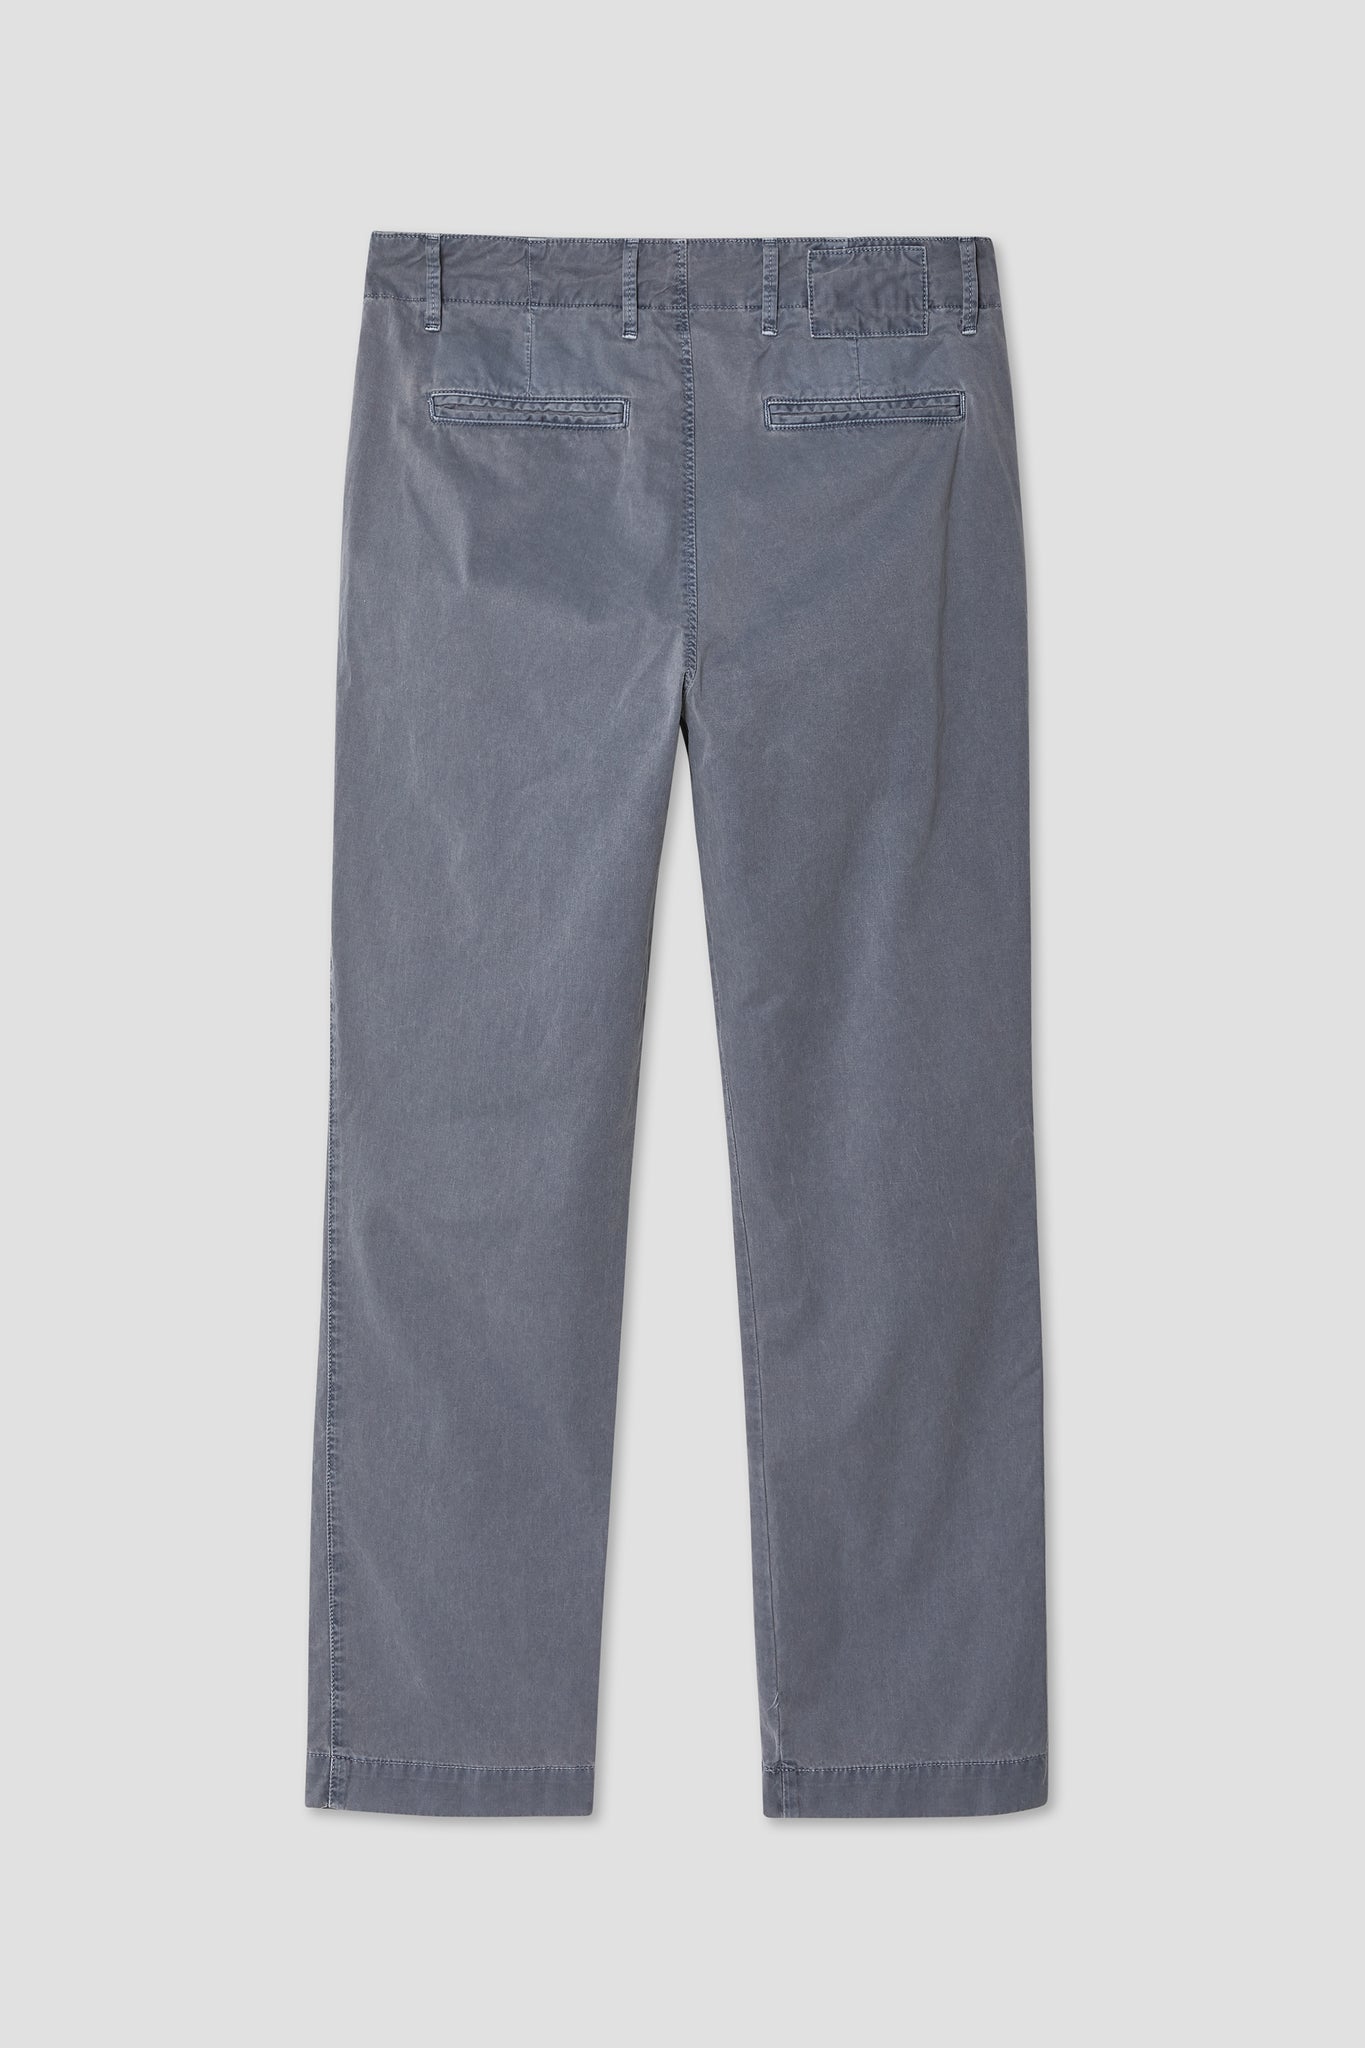 Distressed Button Fly Chino